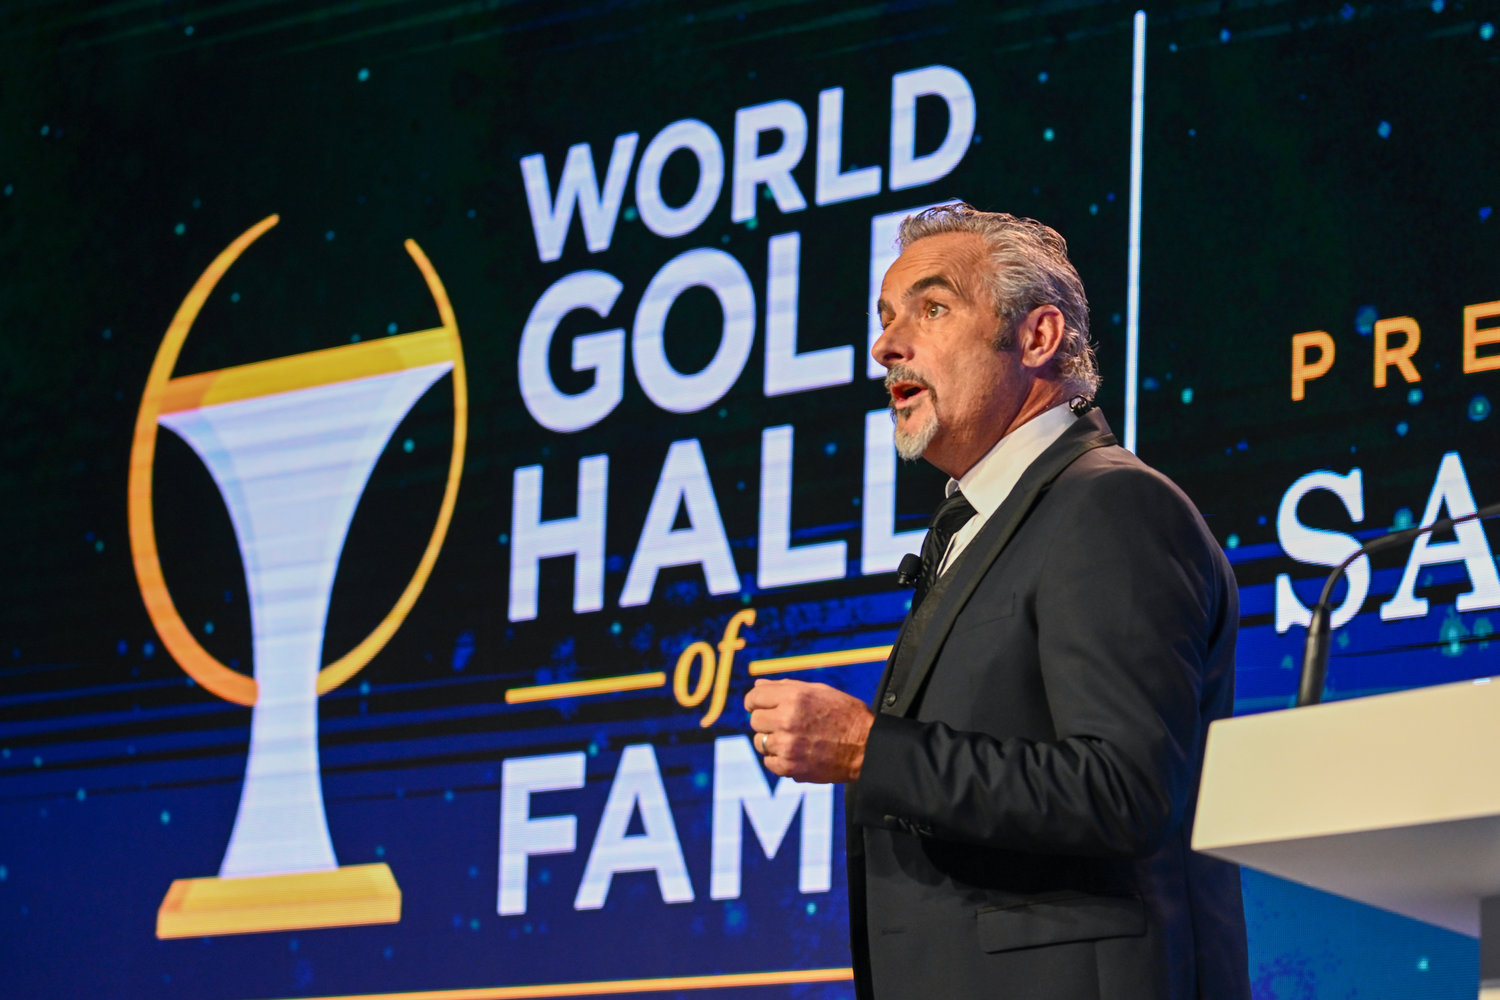 David Feherty serves as host for the evening during the World Golf Hall of Fame Induction Ceremony. Feherty is a former pro golfer and announcer.